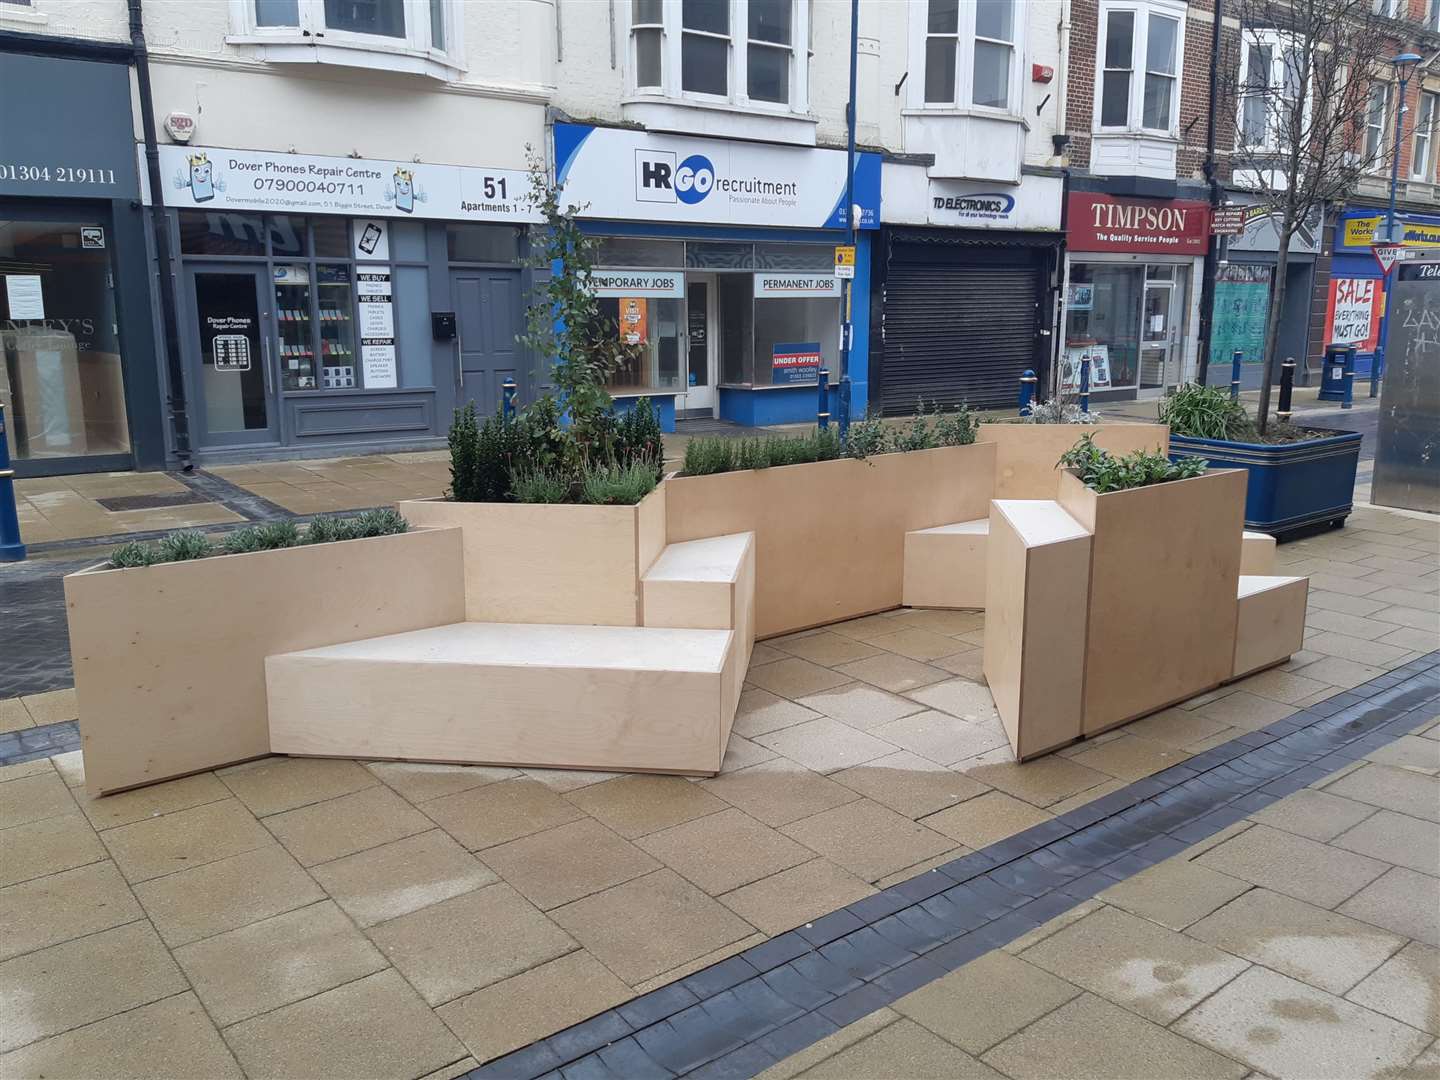 One of the parklets outside B&M in Biggin Street, Dover